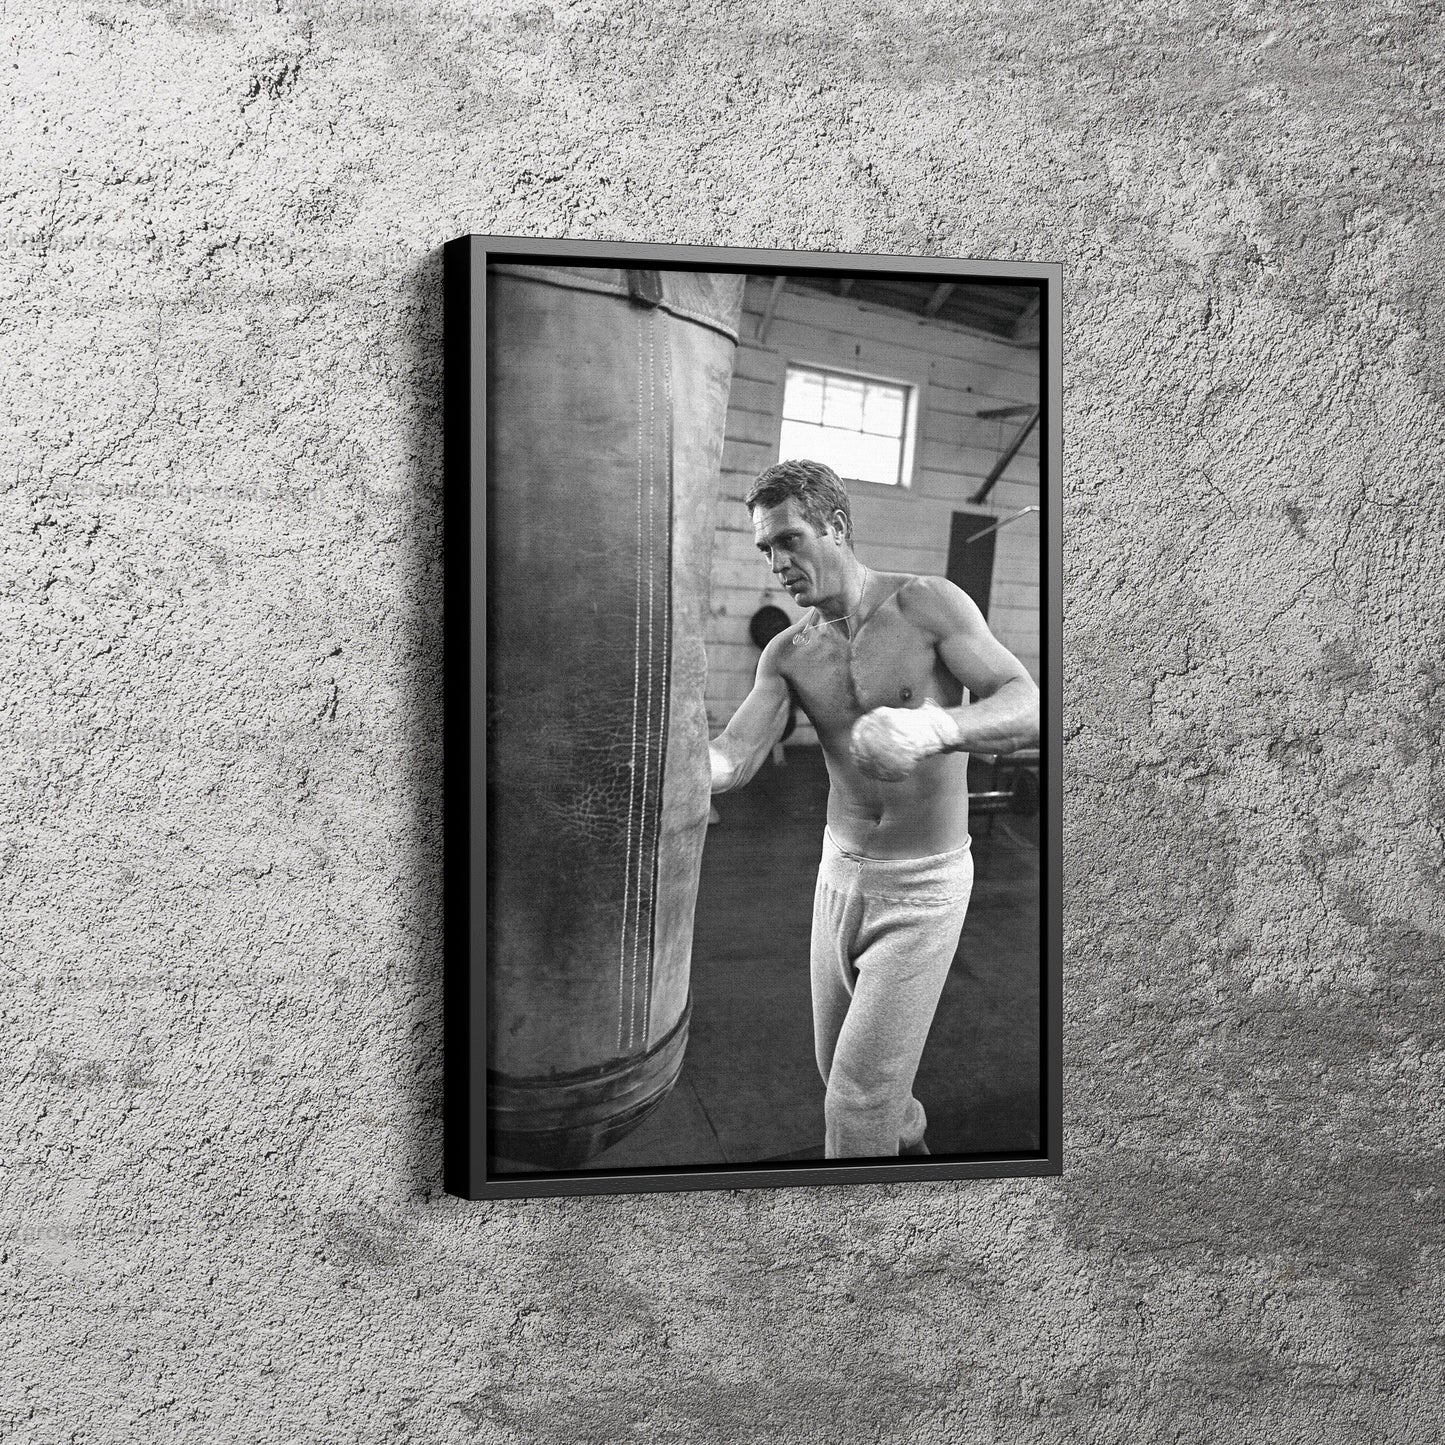 Steve McQueen Poster Training Boxing Black and White Wall Art Home Decor Hand Made Canvas Print